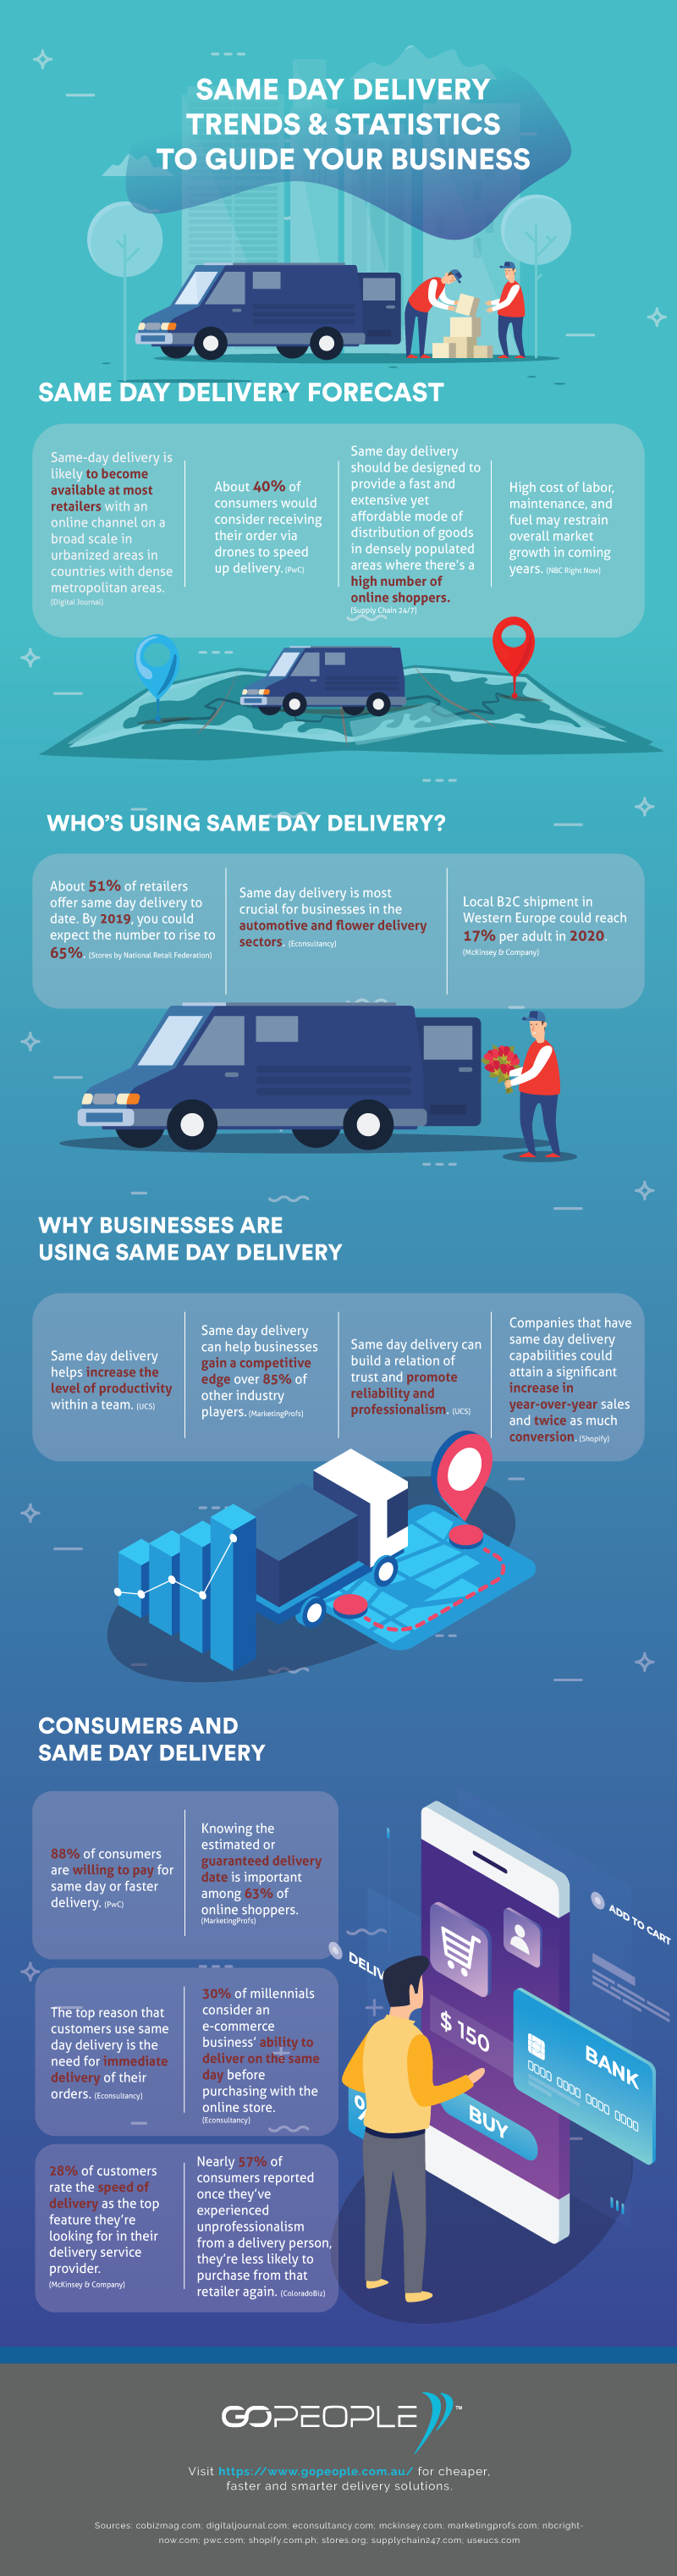 Same Day Delivery Trends and Statistics to Guide Your Business